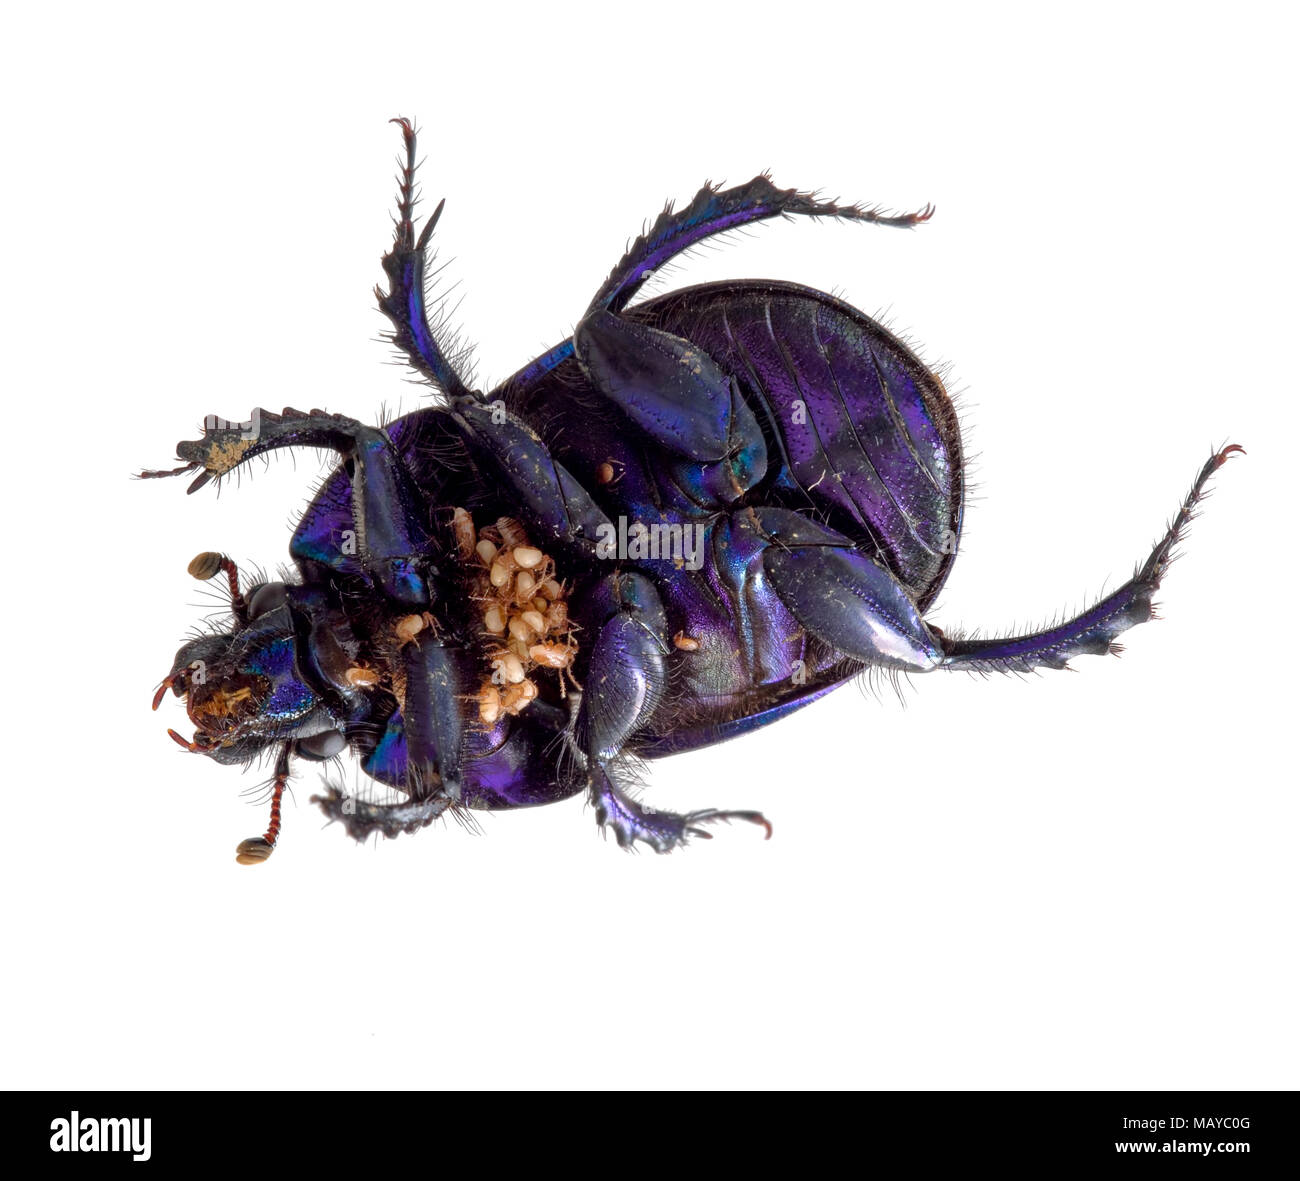 Dung beetle with parasitic or phoretic mites. Stock Photo